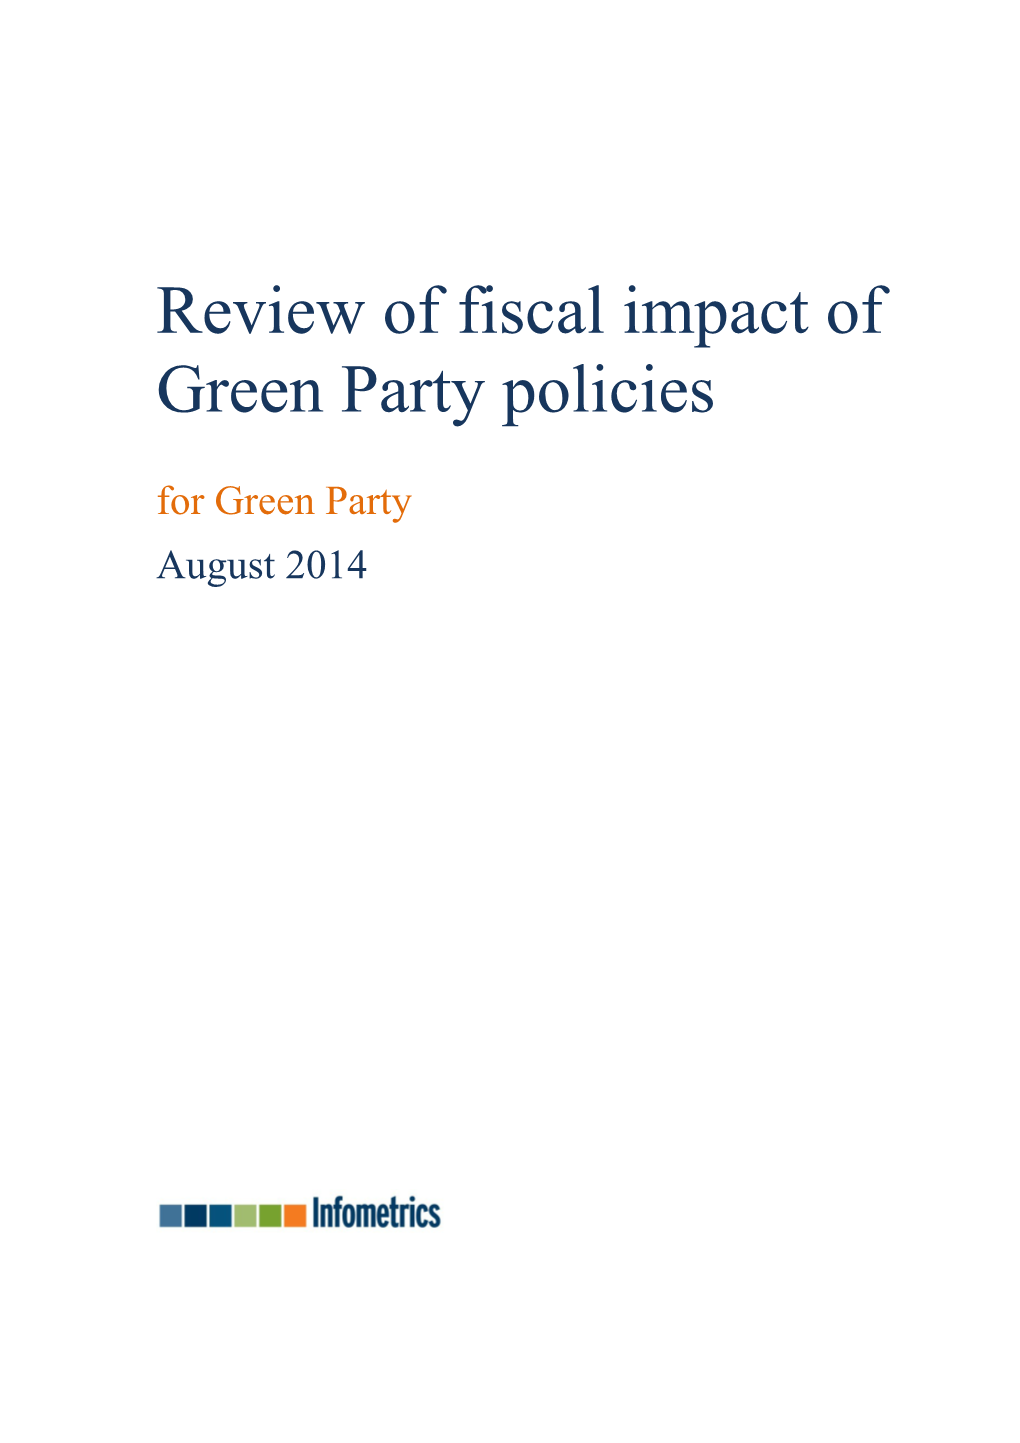 Review of Fiscal Impact of Green Party Policies